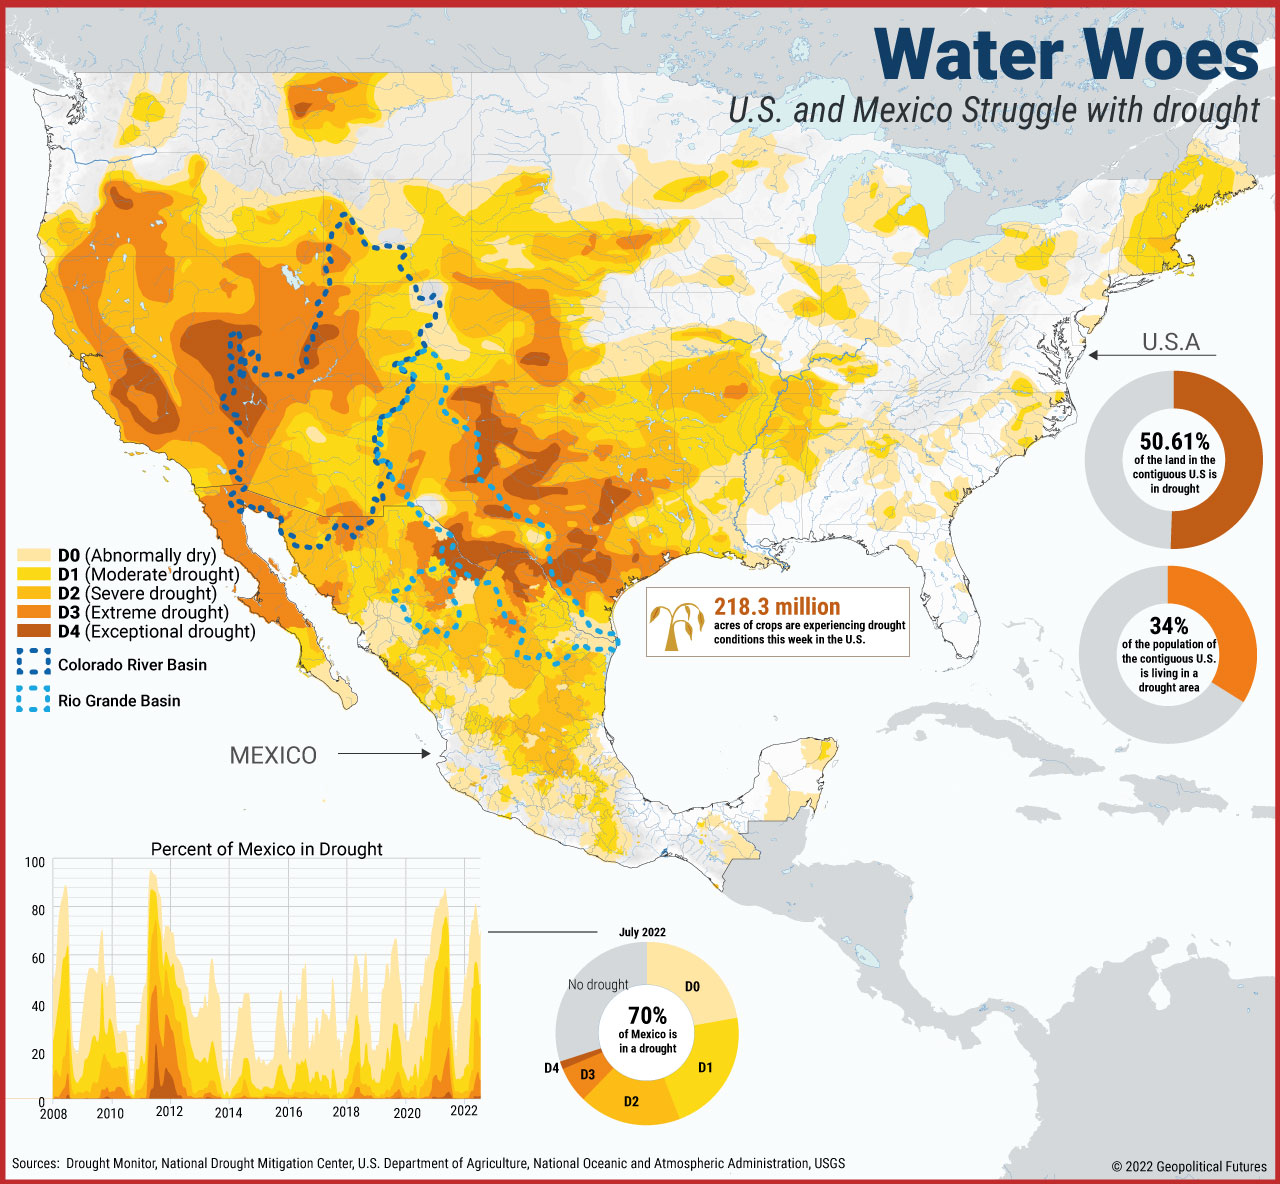 Water Woes: U.S. and Mexico Struggle with drought